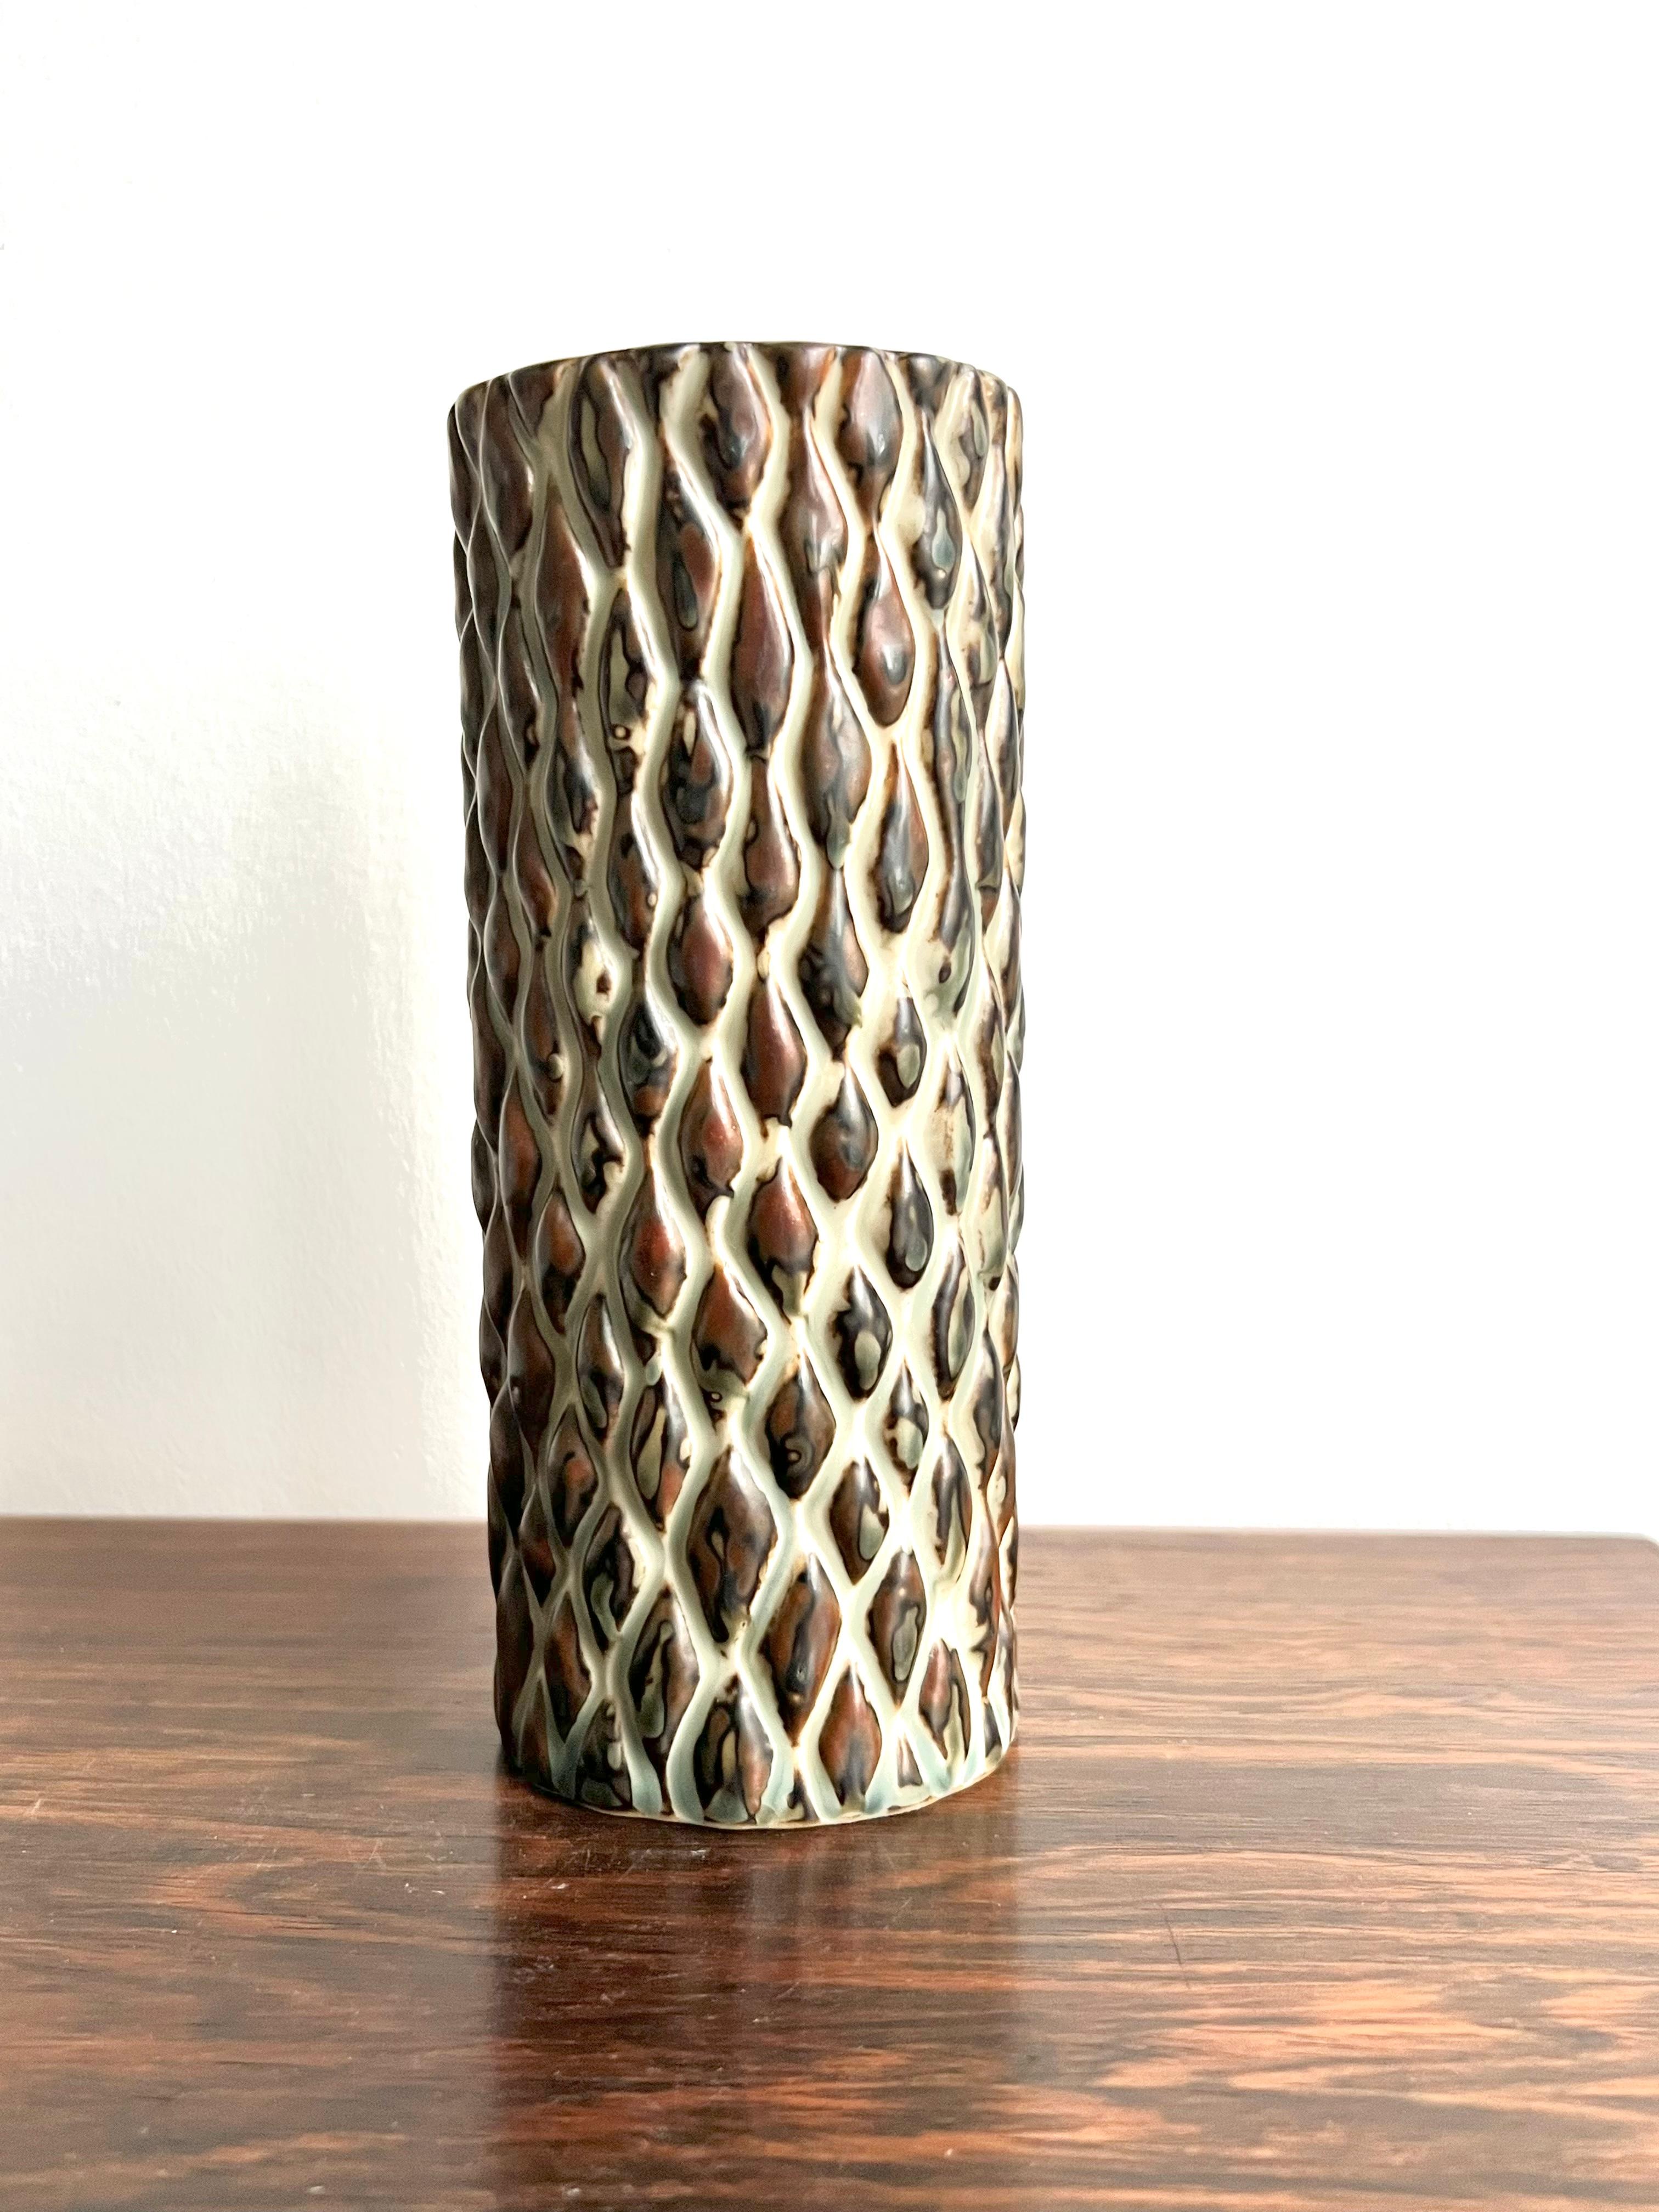 Axel Salto, a peppled style vase for Royal Copenhagen, produced in the 1970’s, but designed pre 1950. The vase is covered with a darkbrown “Sung glaze” from Royal Copenhagen. He used the cylinder shape for many of his vases and added various